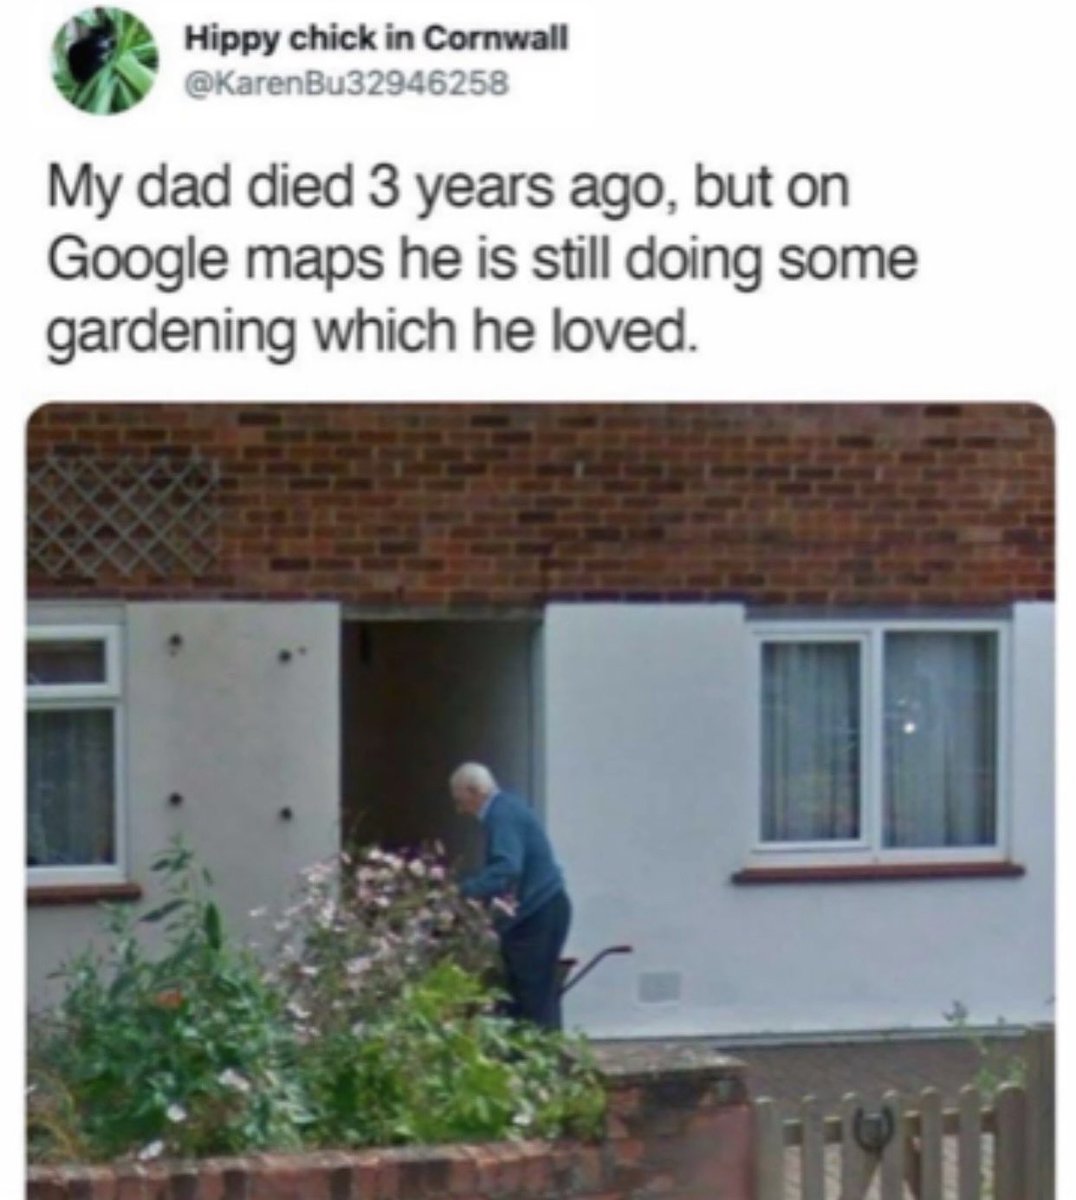 dudes posting their w's - my dad died 3 years ago but - Hippy chick in Cornwall My dad died 3 years ago, but on Google maps he is still doing some gardening which he loved.